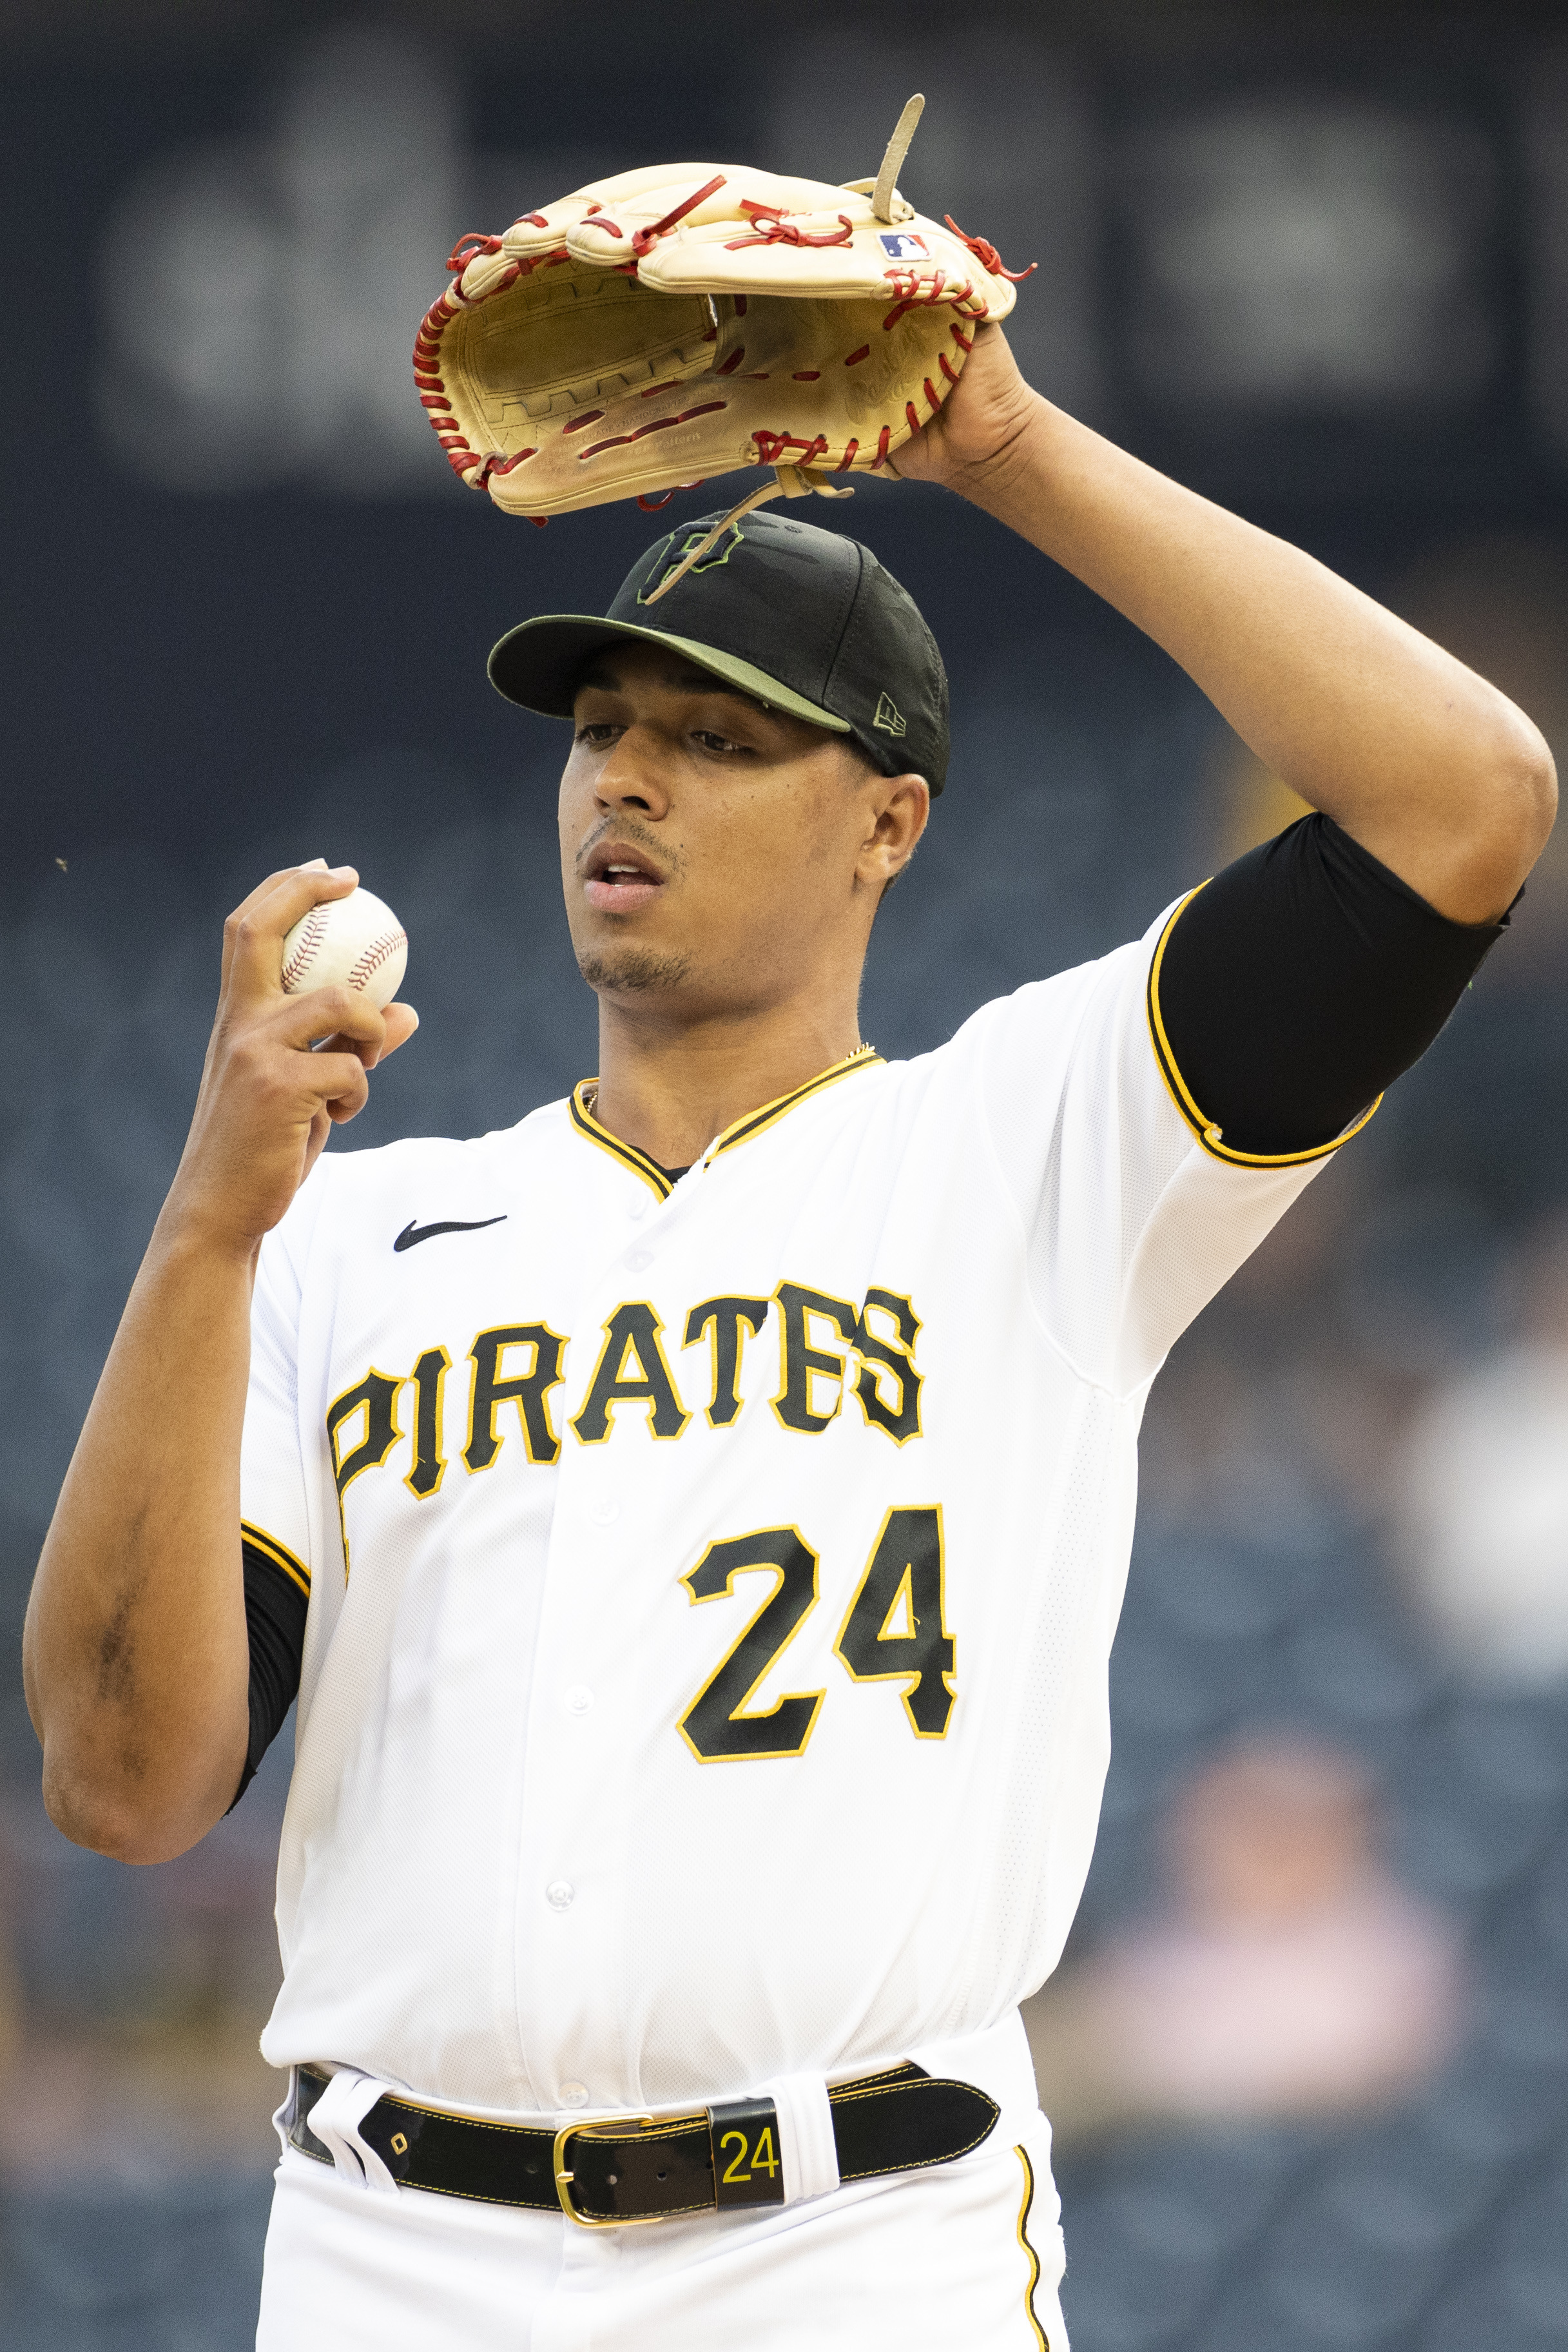 Pirates scrape out victory, hand A's 15th straight road loss